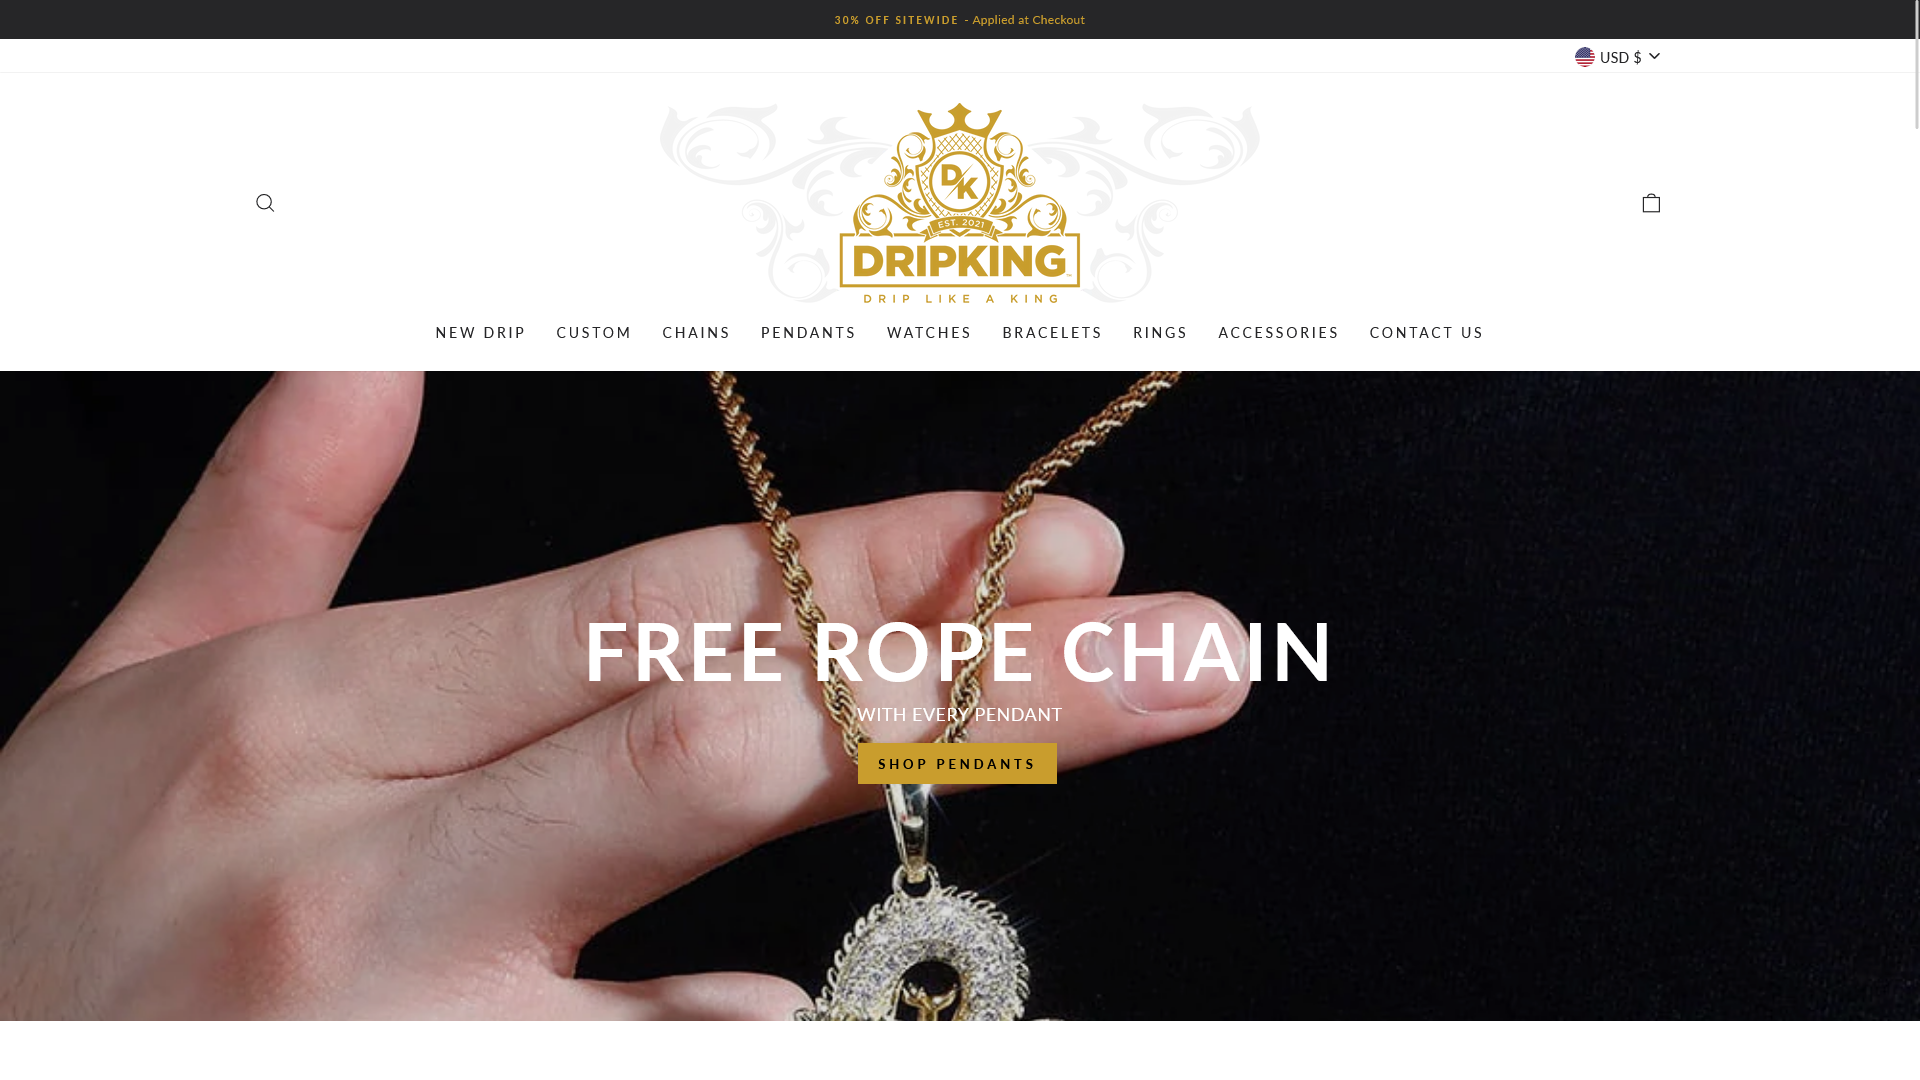 Shopify Store Challenges - Drip King